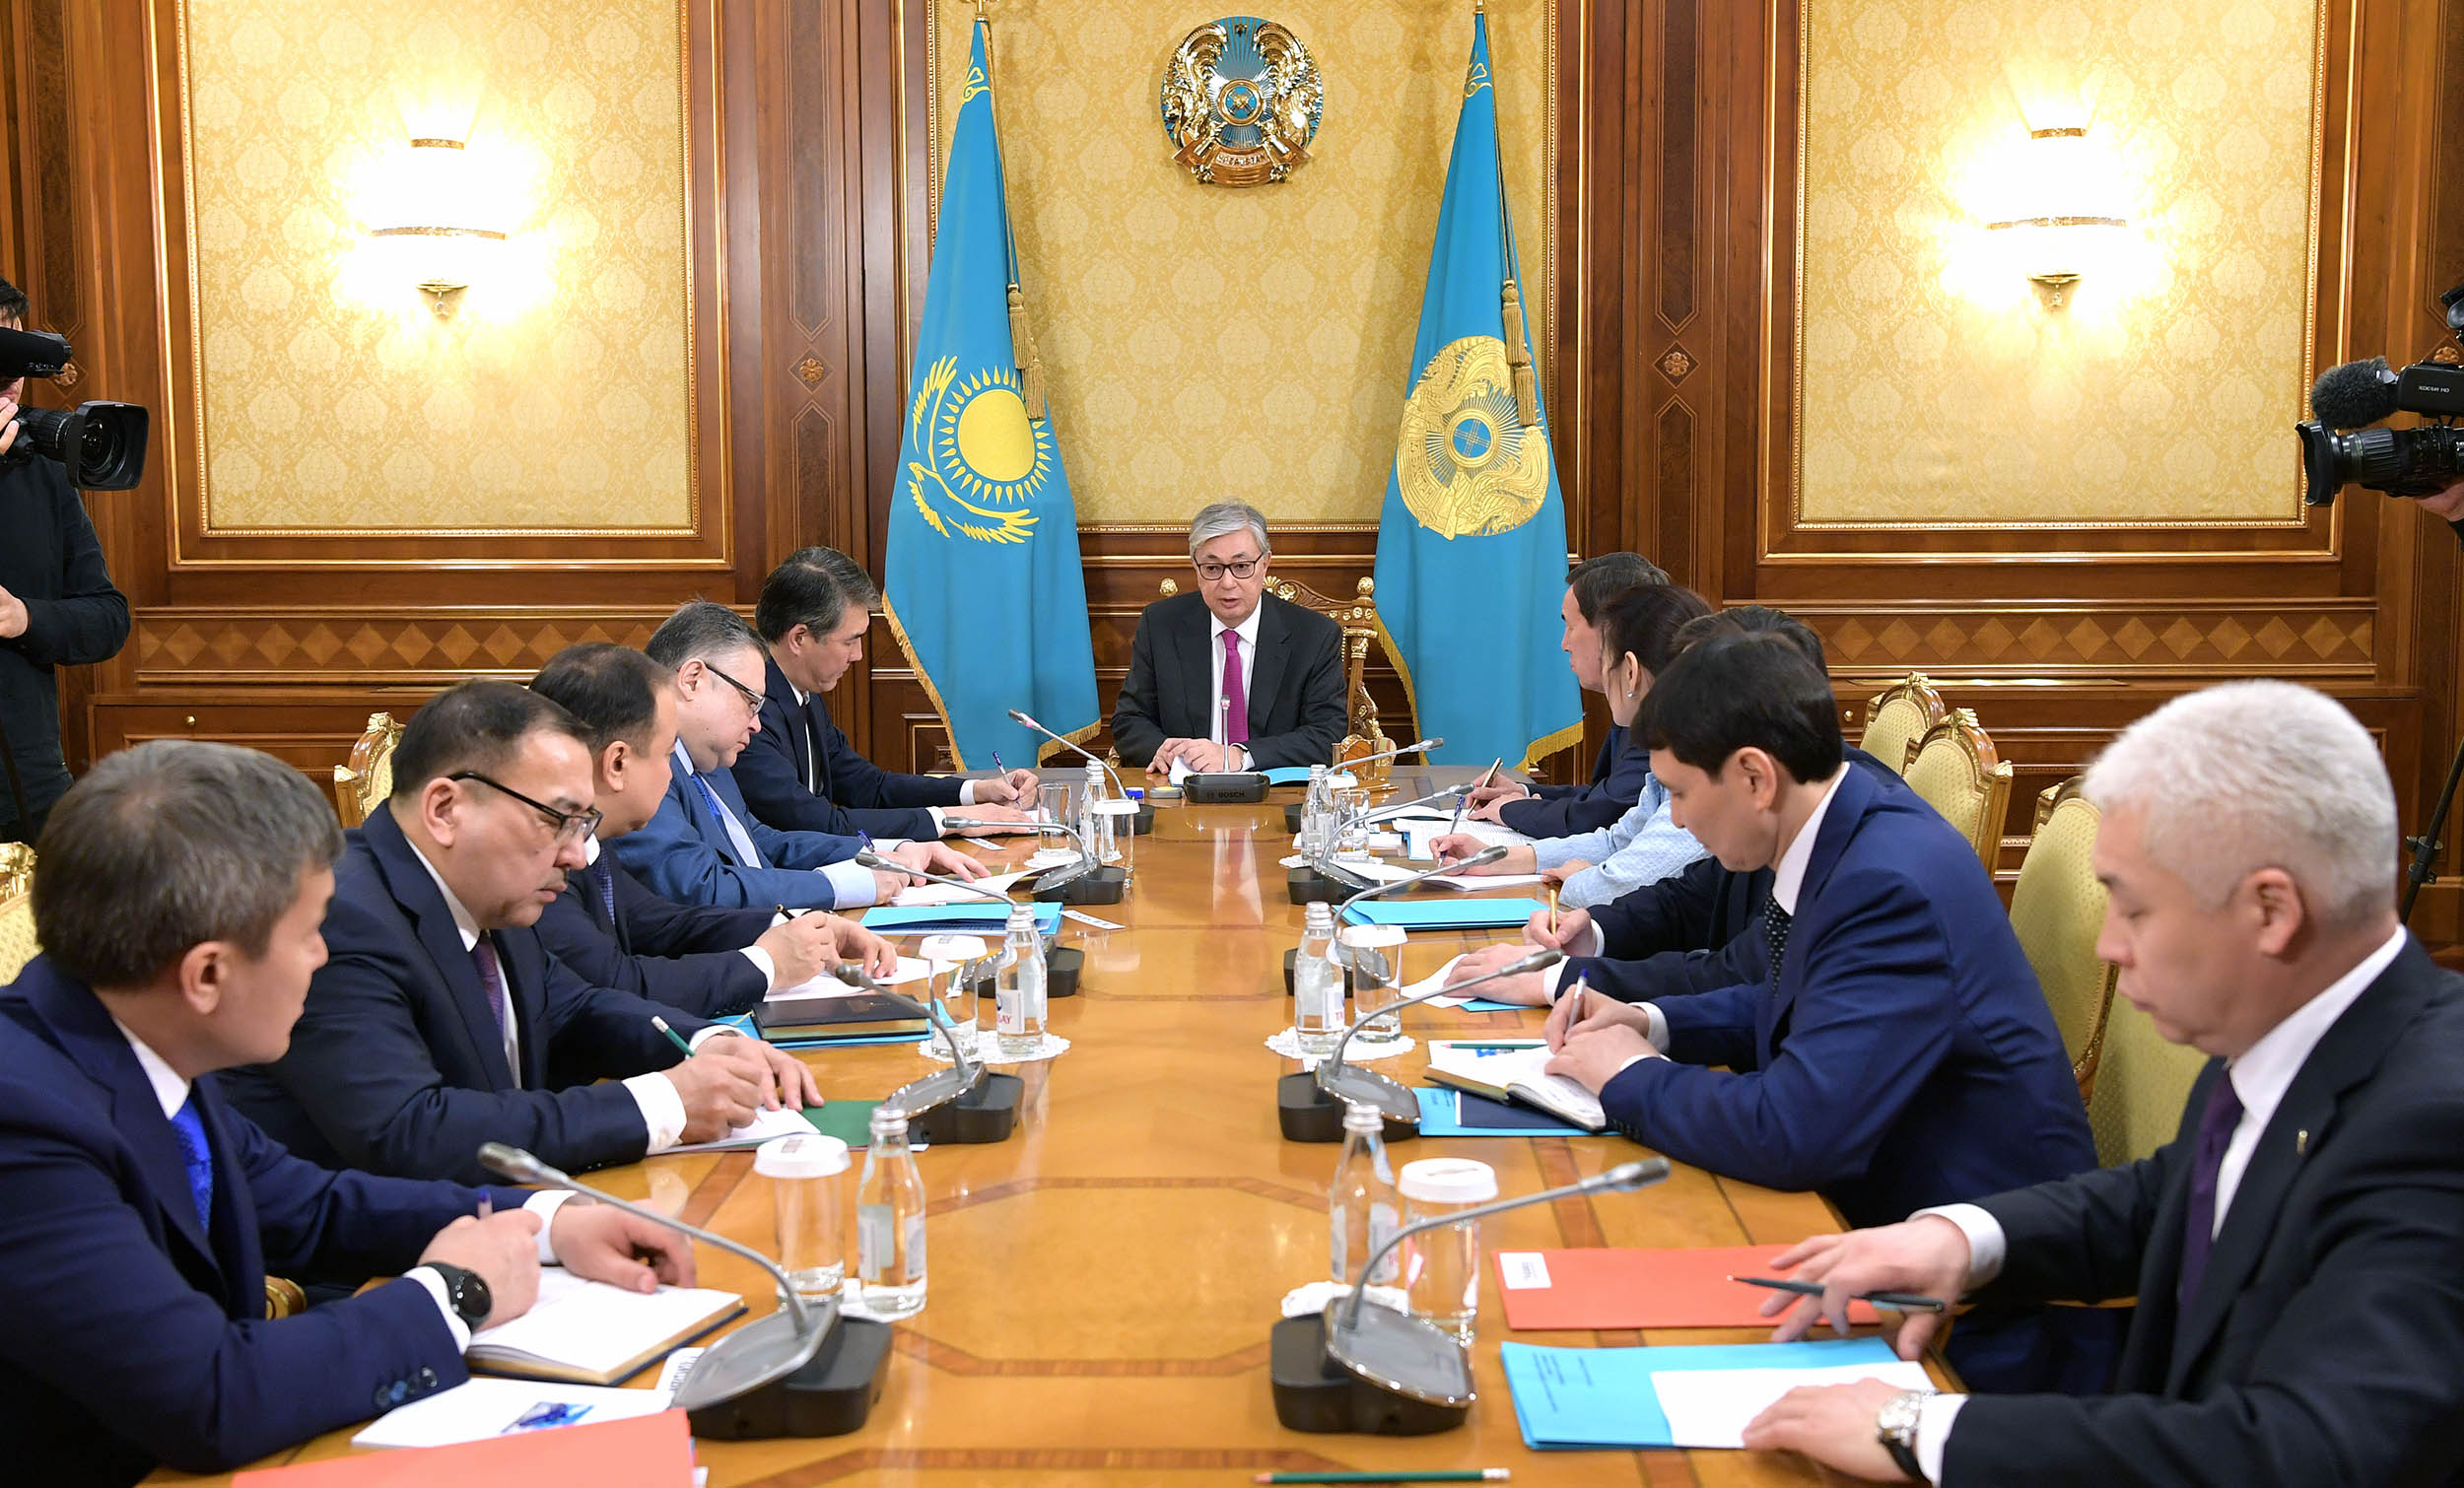 The President of Kazakhstan met with the leadership of the Presidential Administration